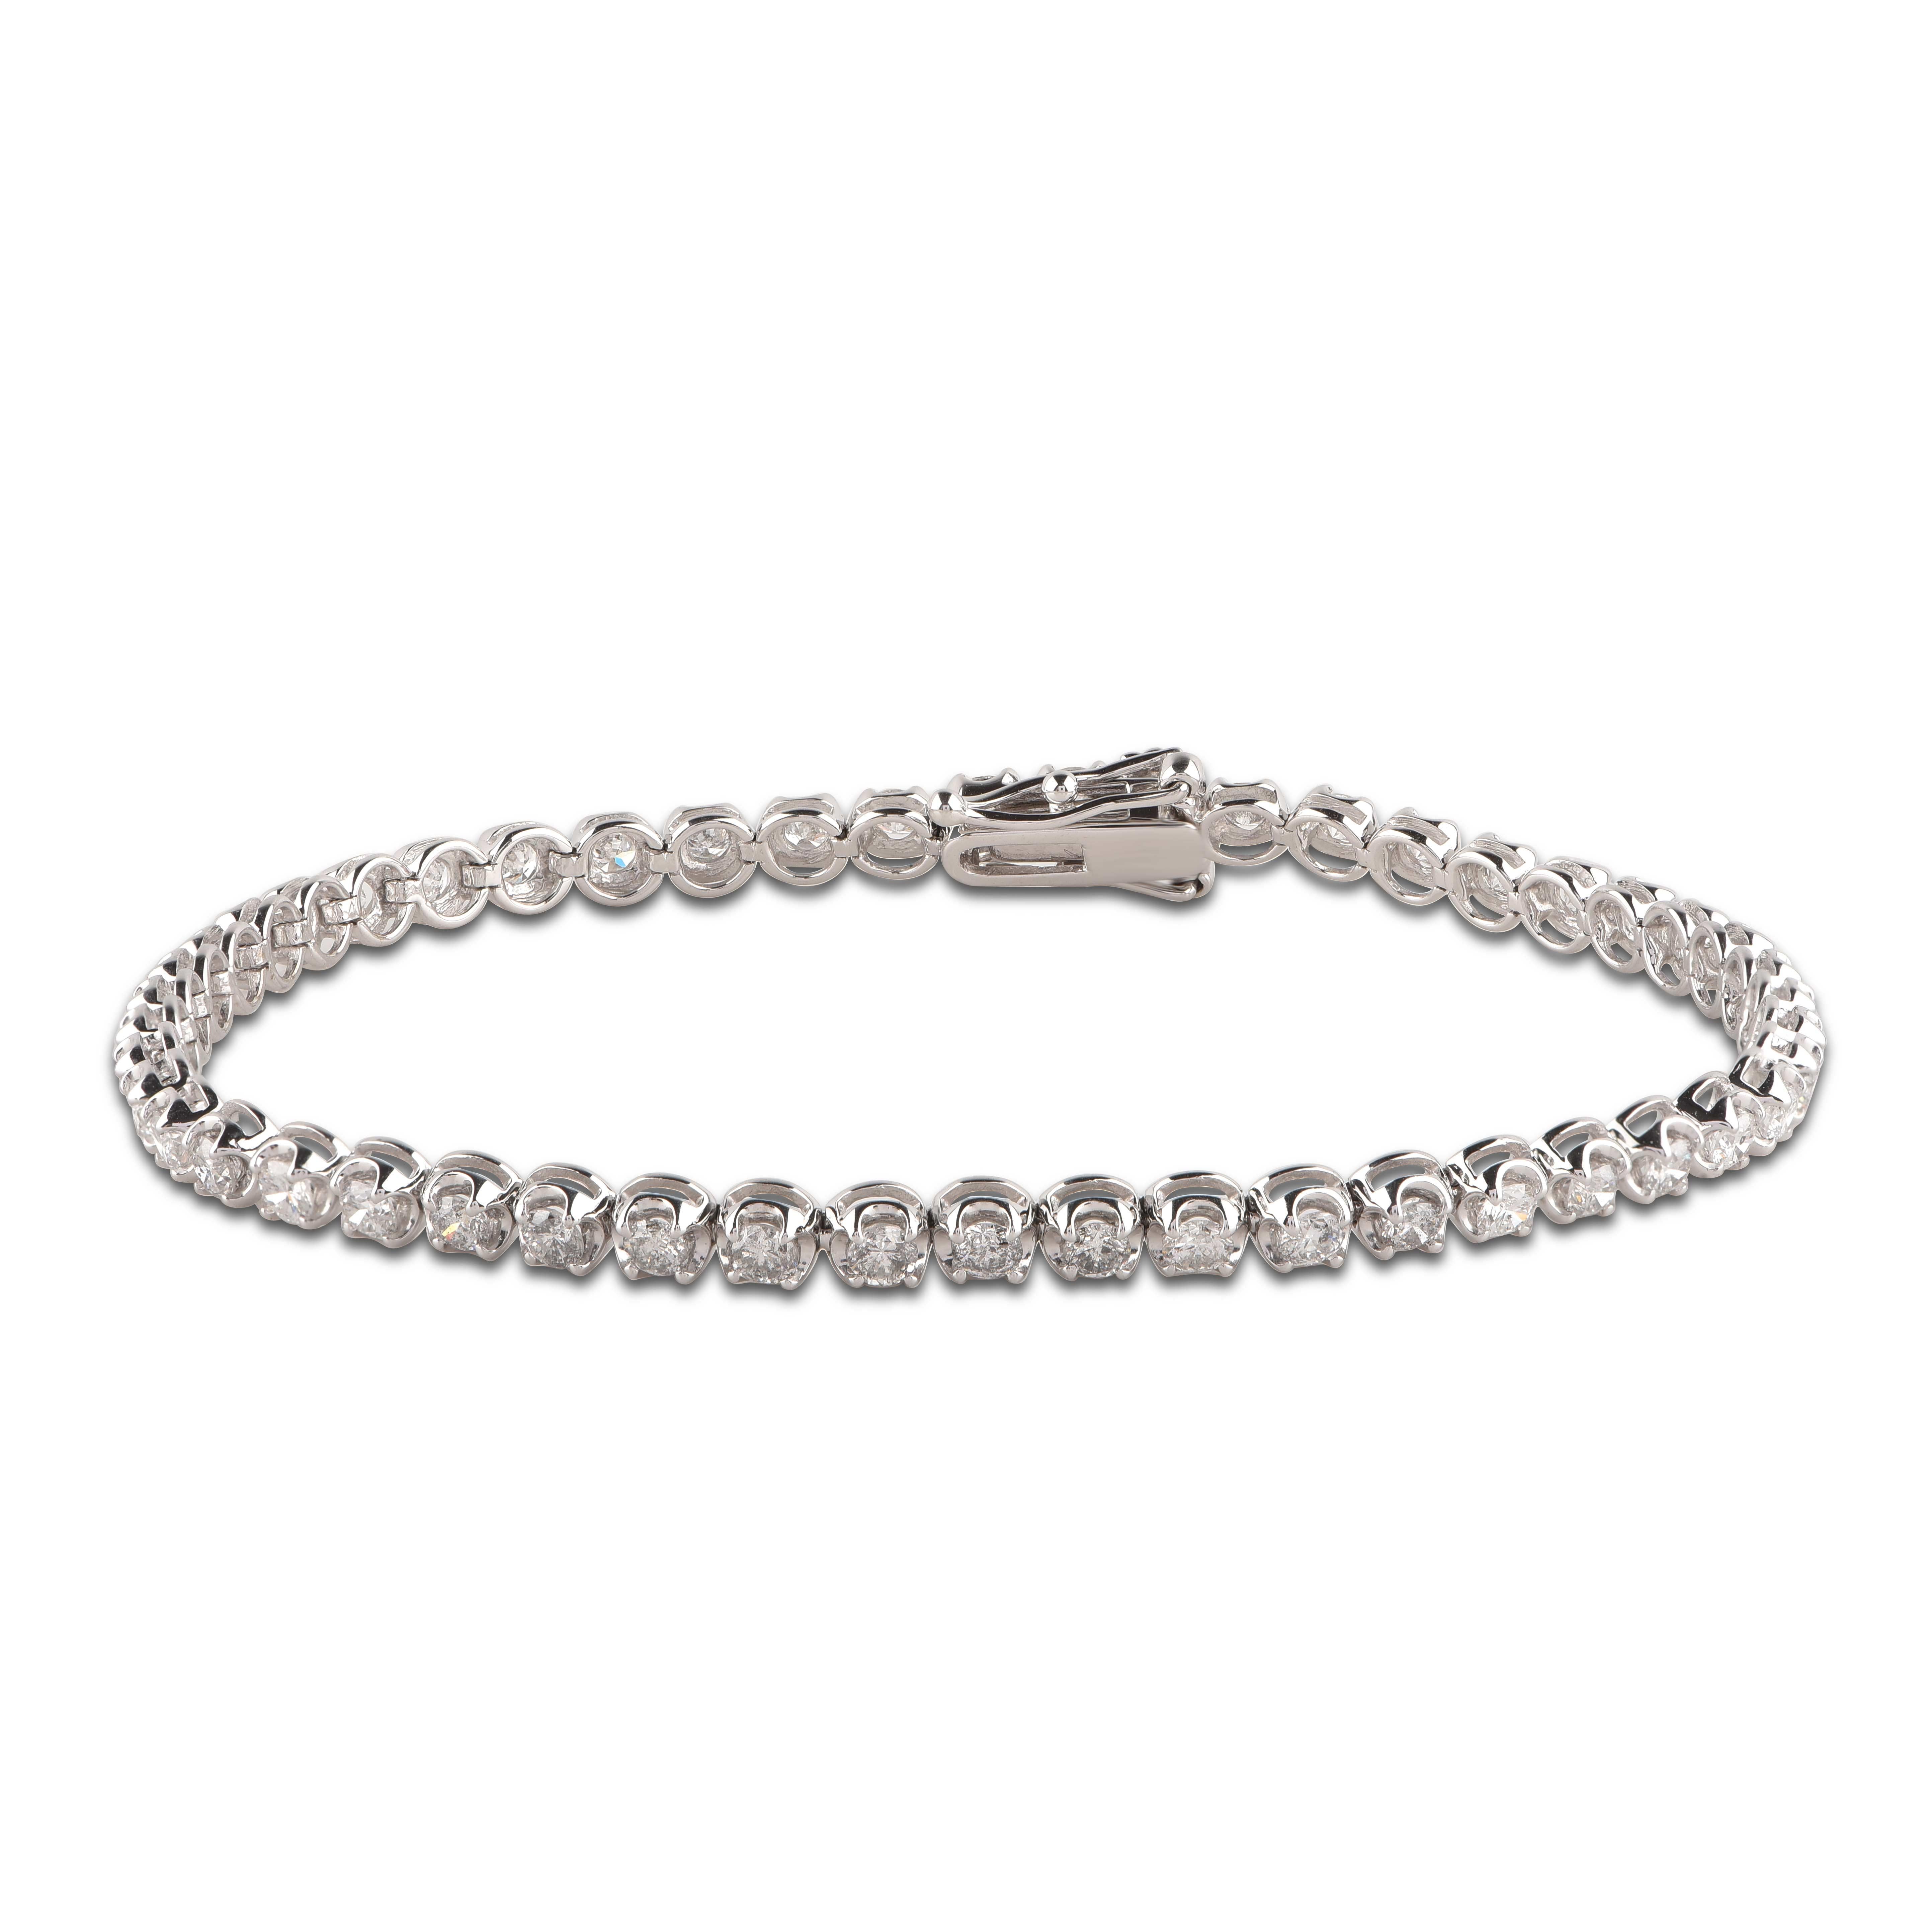 Wrap her wrist in this luxury diamond tennis bracelet. Crafted to Perfection by our inhouse experts in 14 Karat White Gold and studded with 48 round brilliant-cut diamonds in prong setting. The total weight of diamond is 3.00 Carat and it shine with